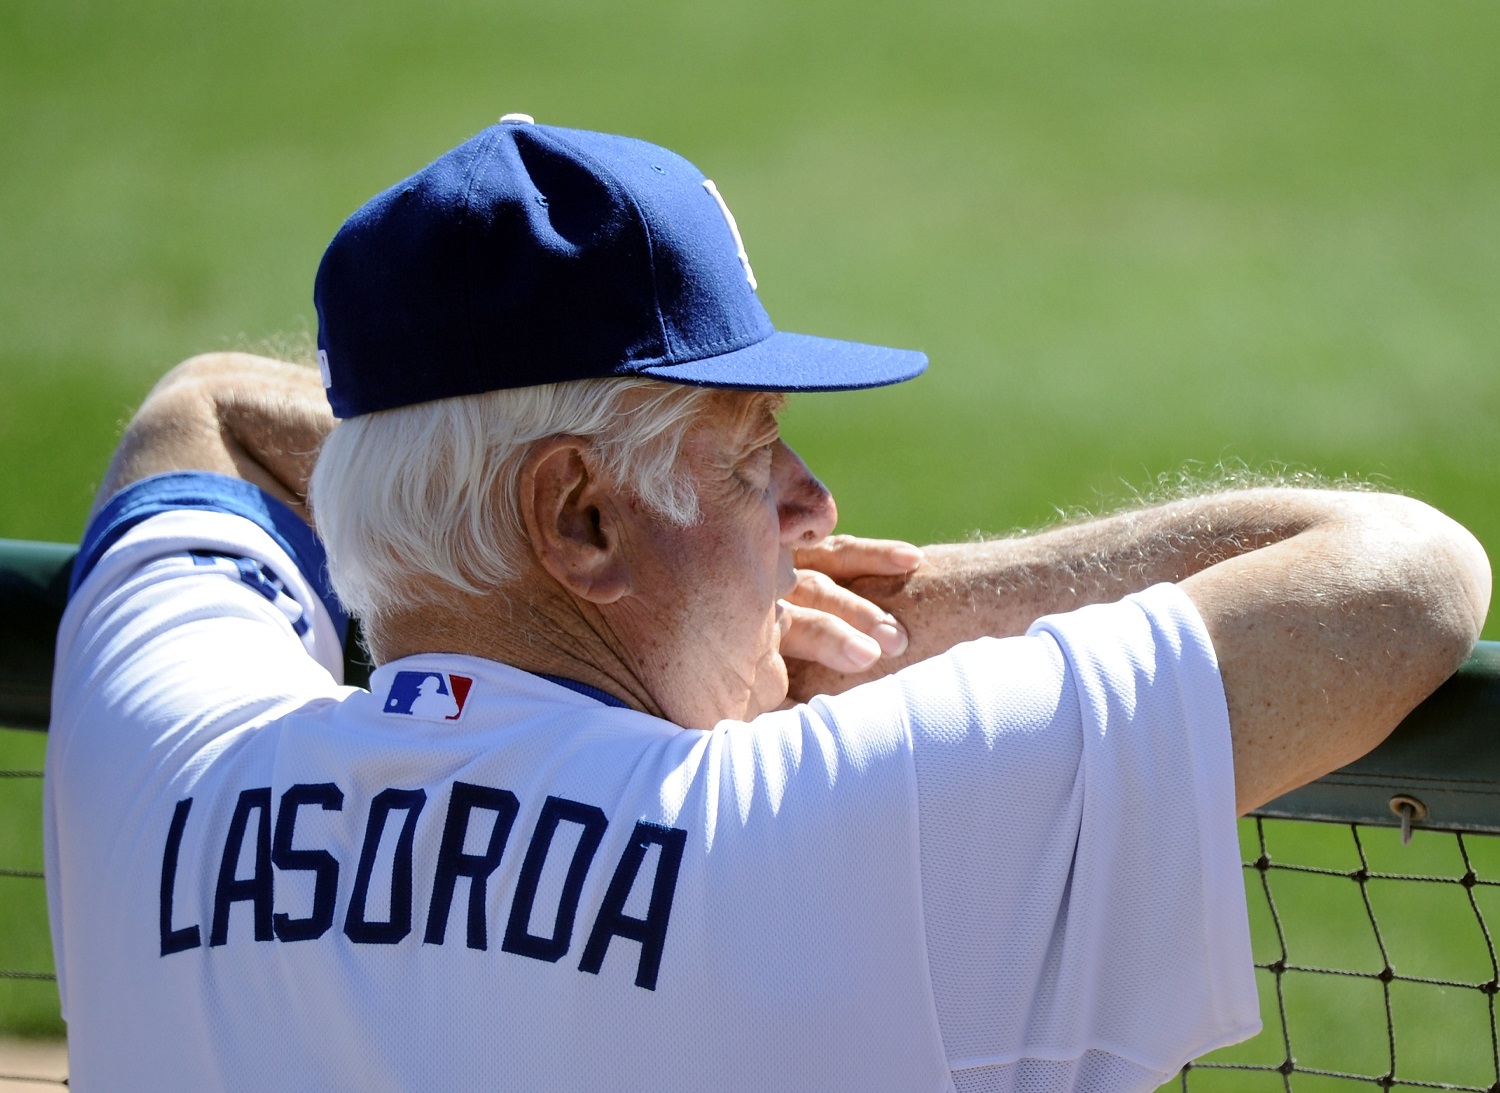 Tommy Lasorda’s Legacy Includes Wishing His Racist Friend’s Mistress Would Get Hit by a Car and Racist Comments of His Own